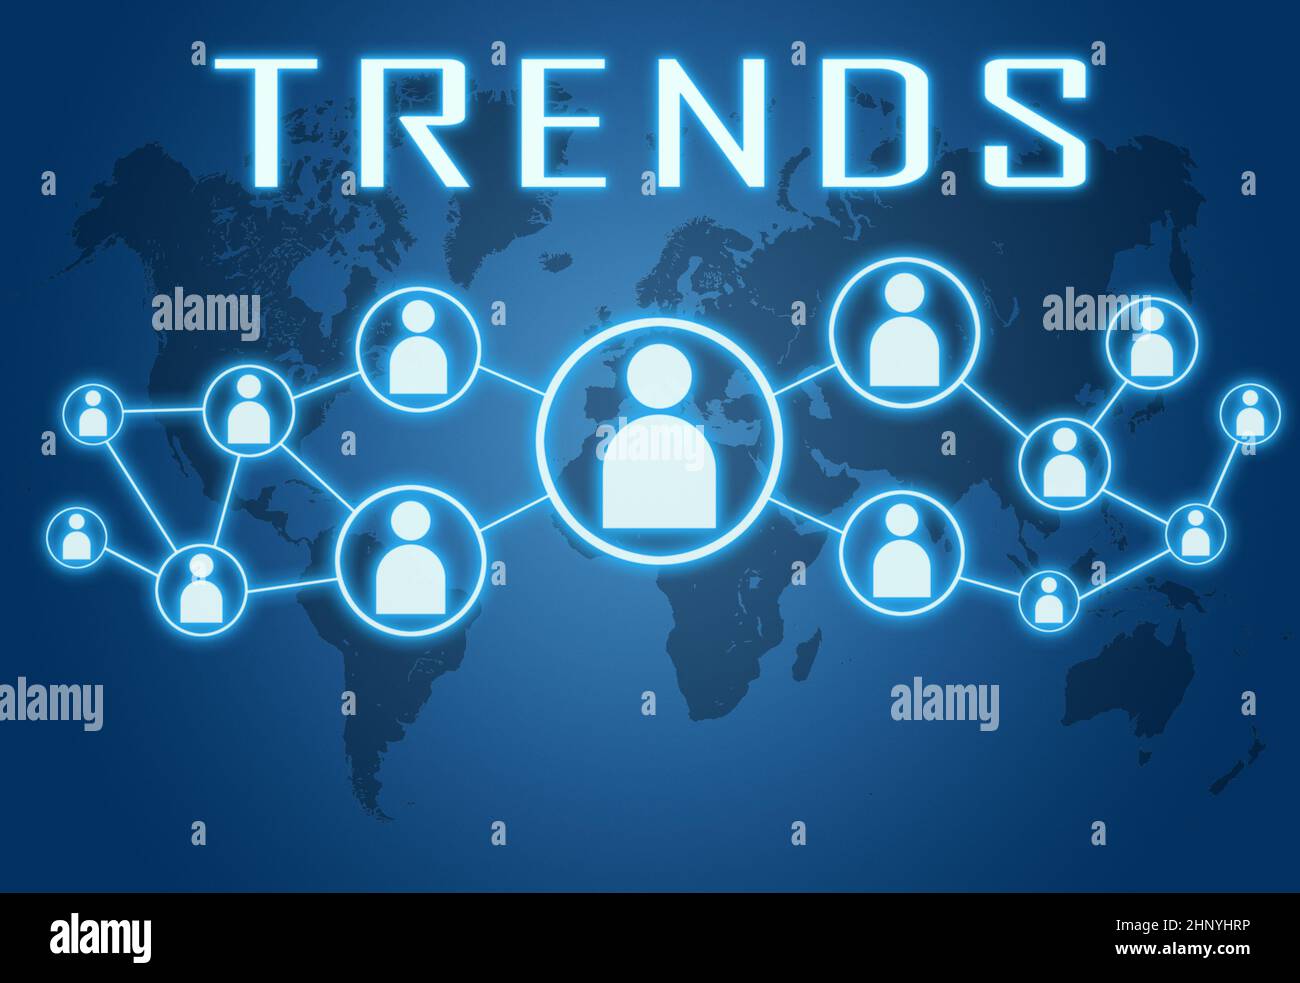 Trends - text concept on blue background with world map and social icons. Stock Photo